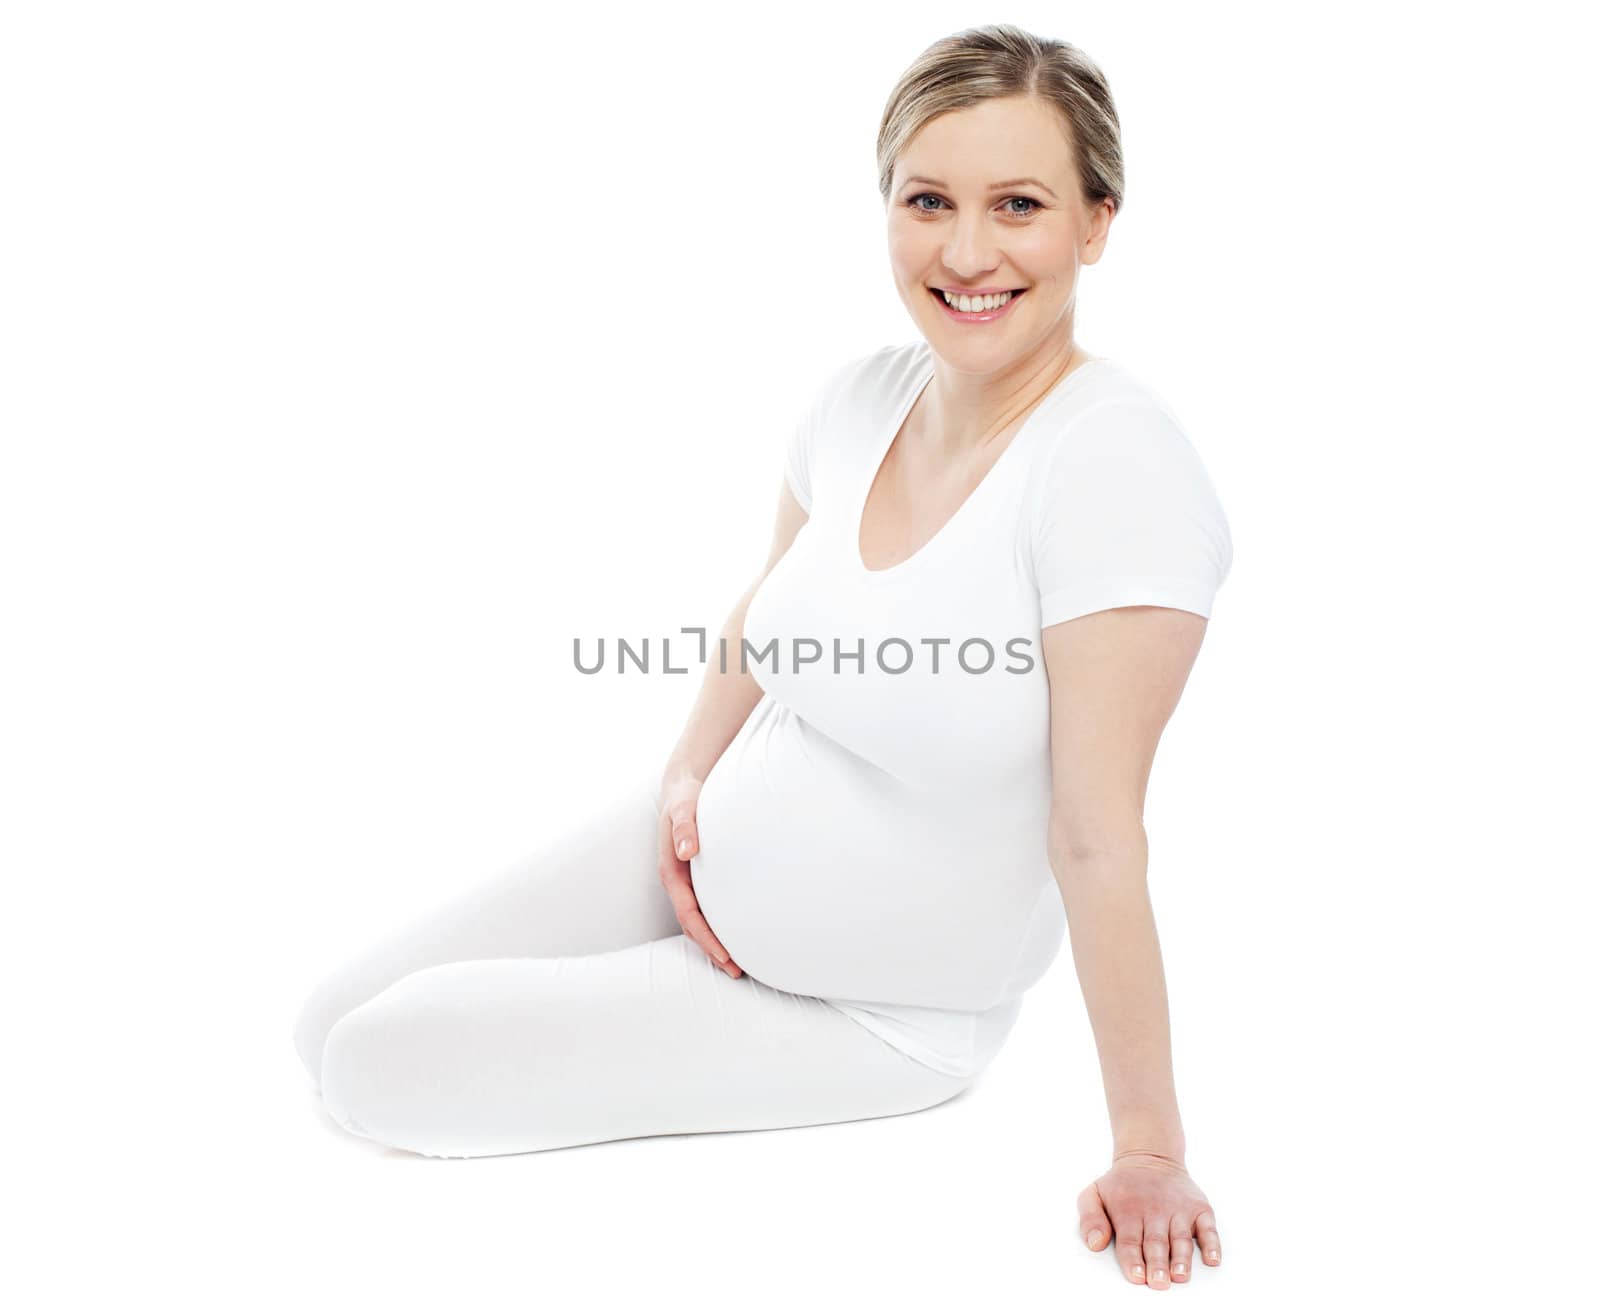 Studio portrait of pregnant woman dressed in white. Isolated